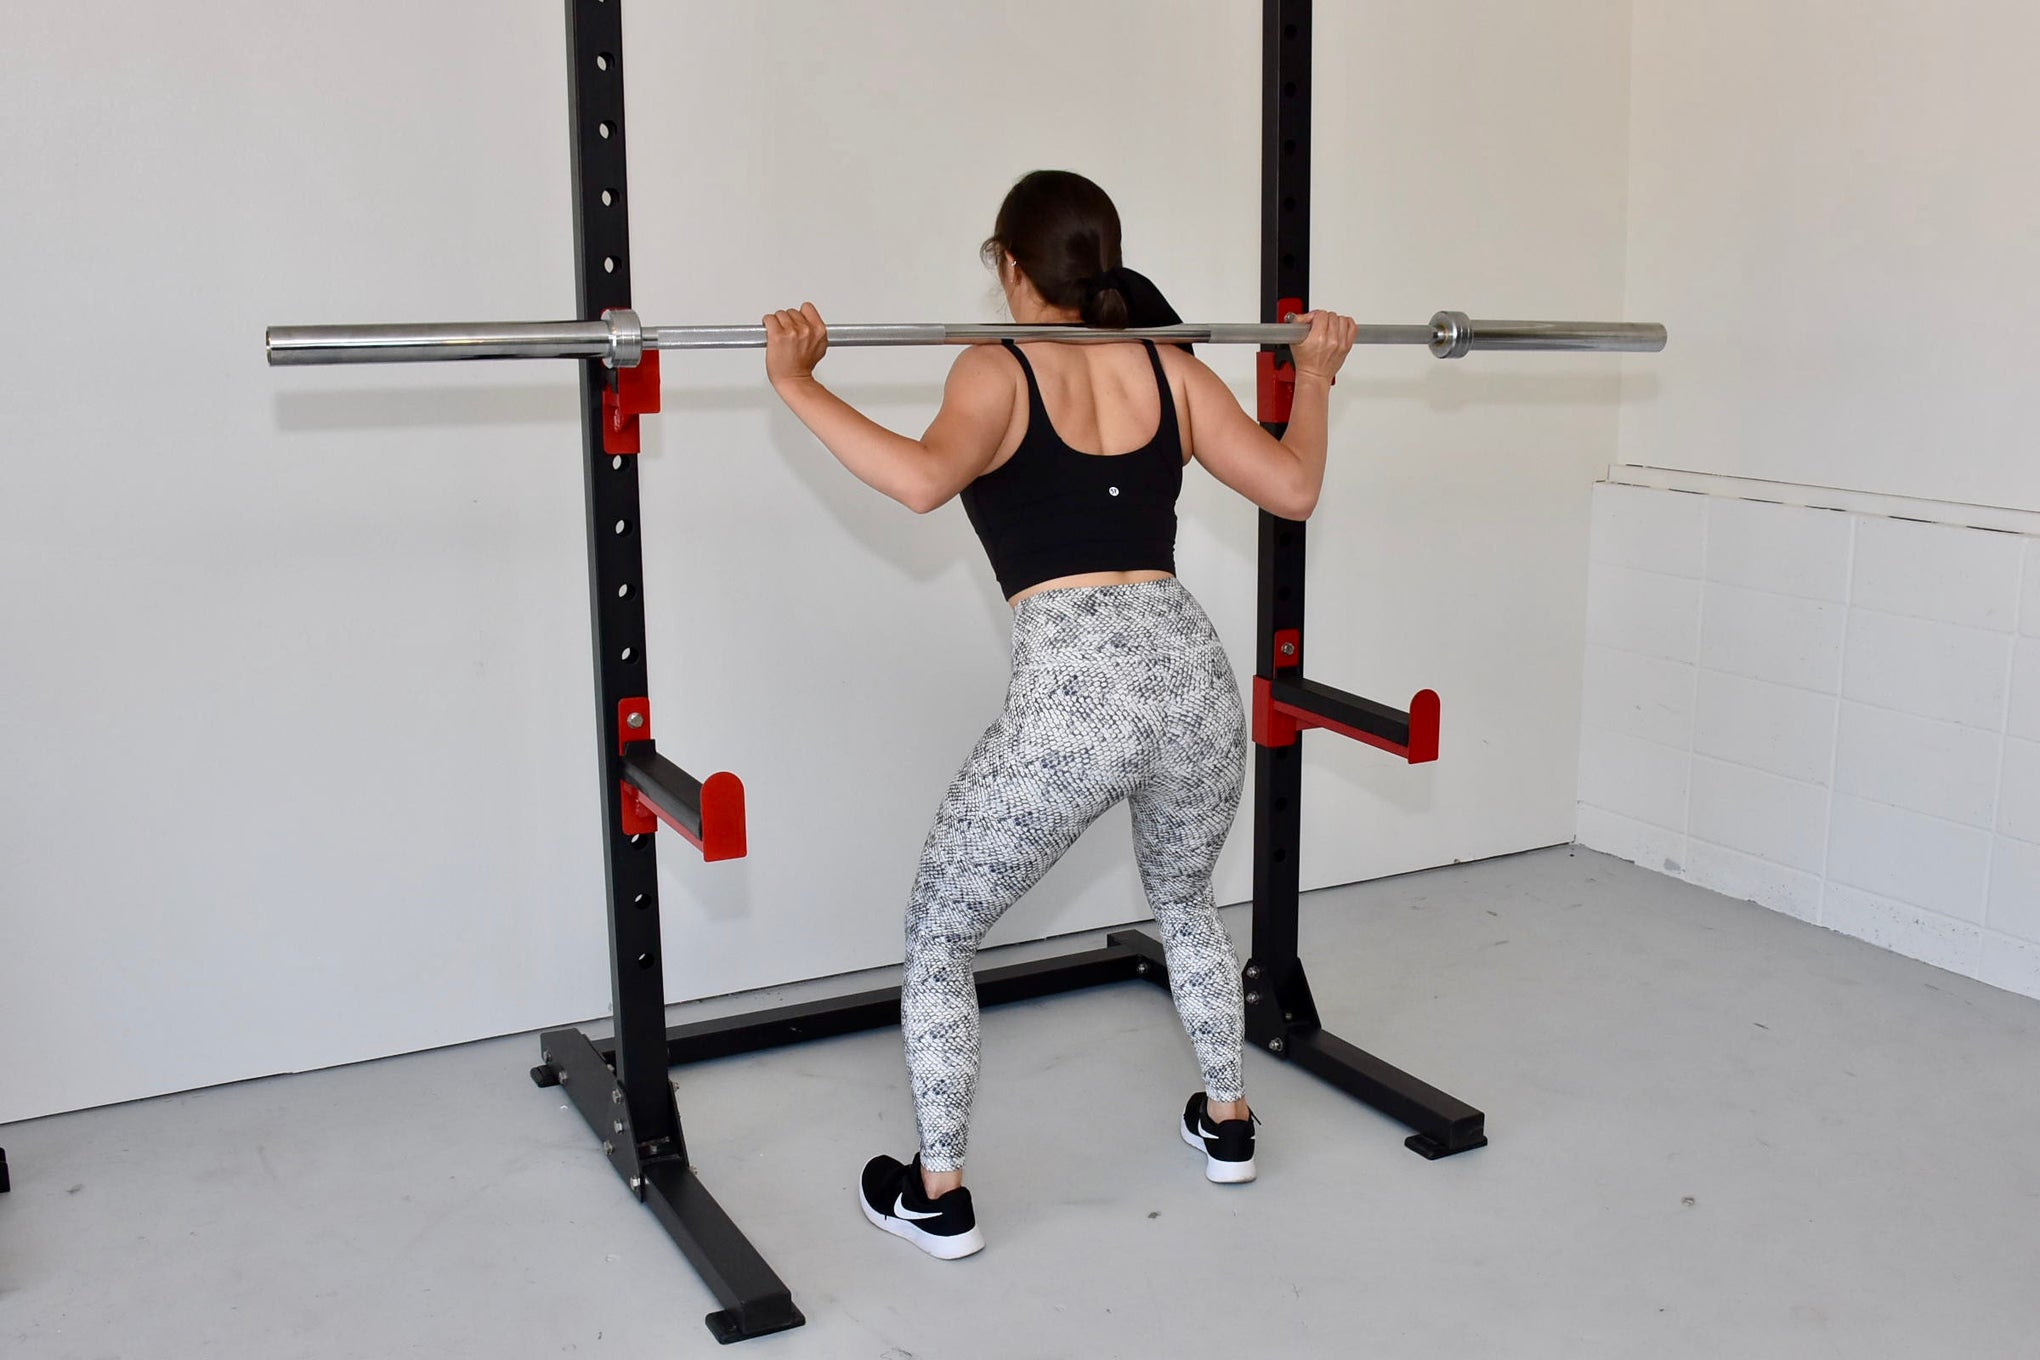 Commercial grade multifuction squat rack and Commercial grade stainless steel olympic barbell.